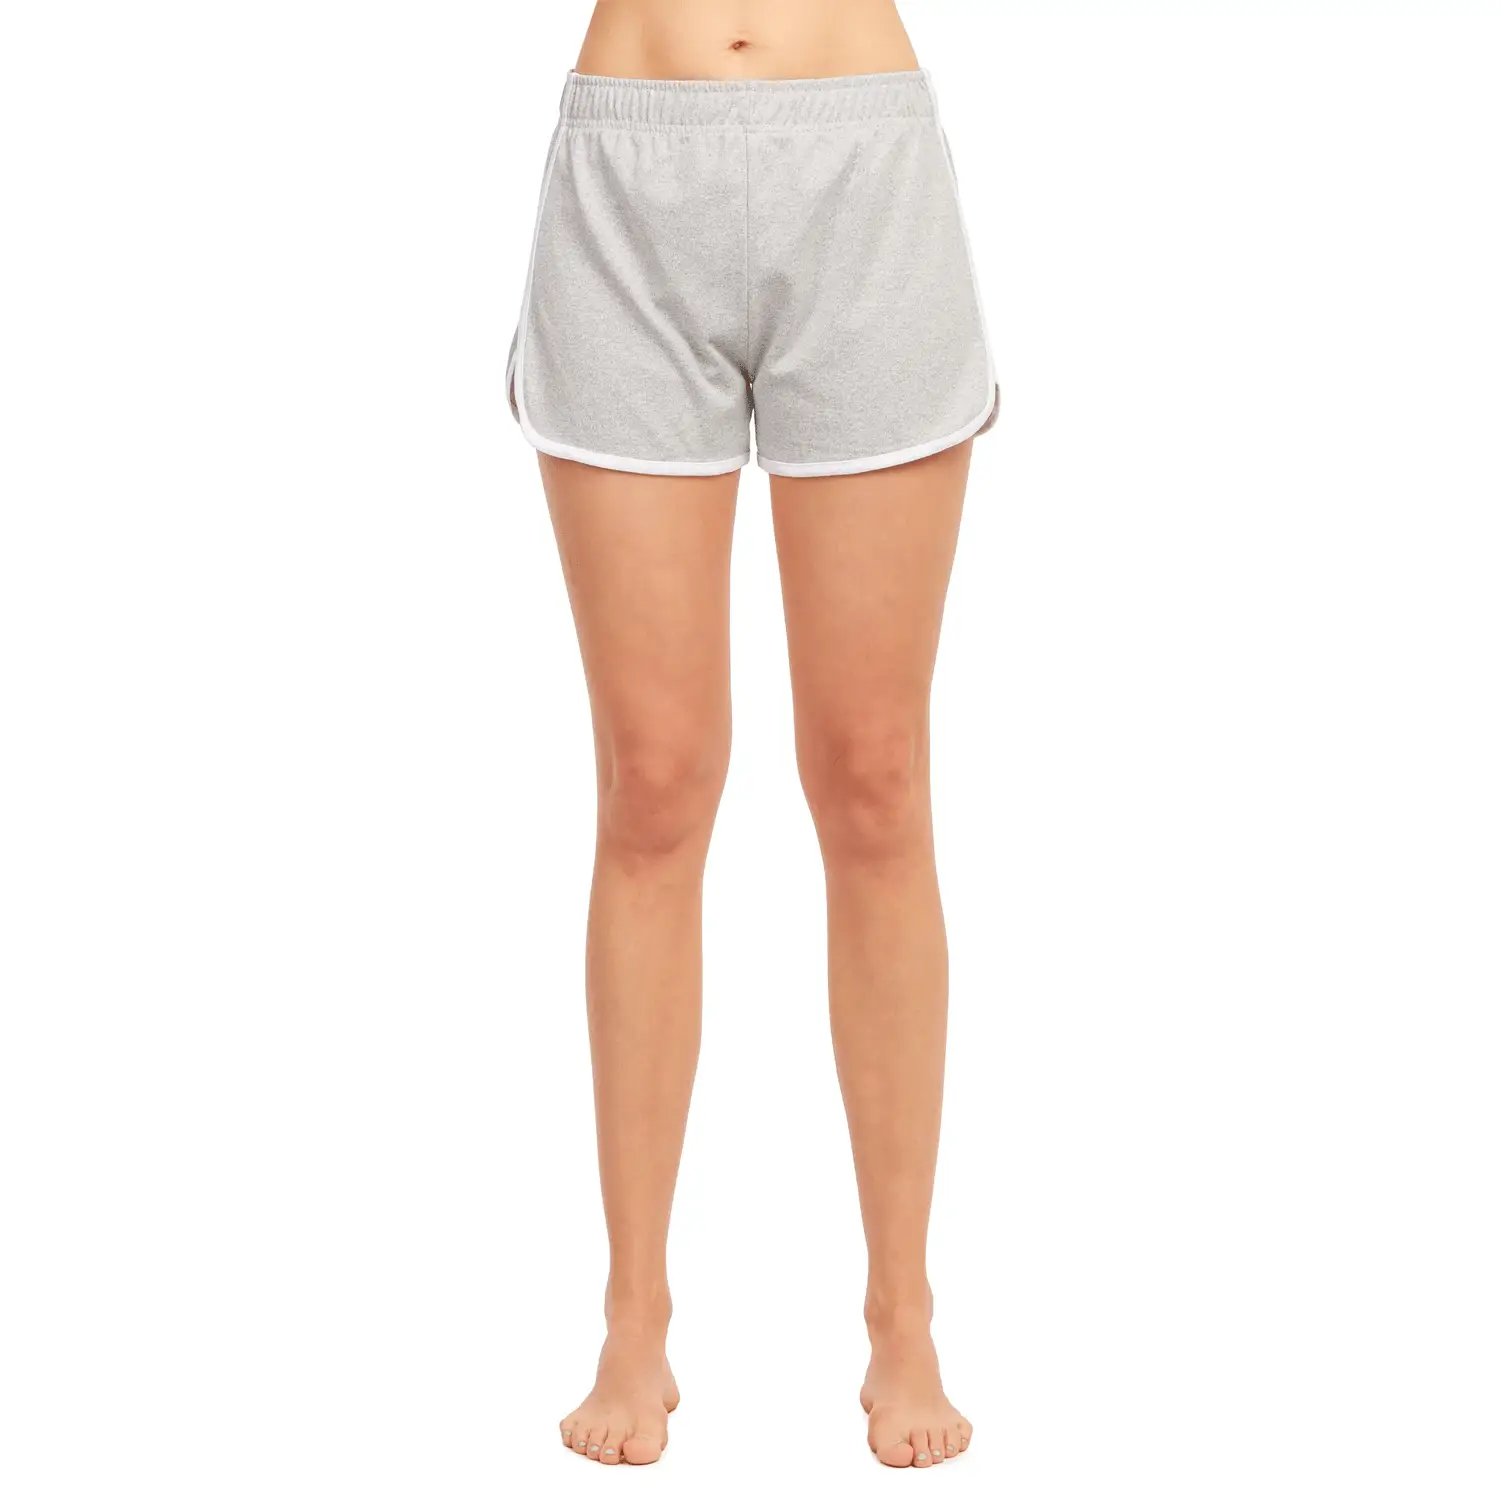 Sofra Ladies Dolphin Shorts Pack of 3